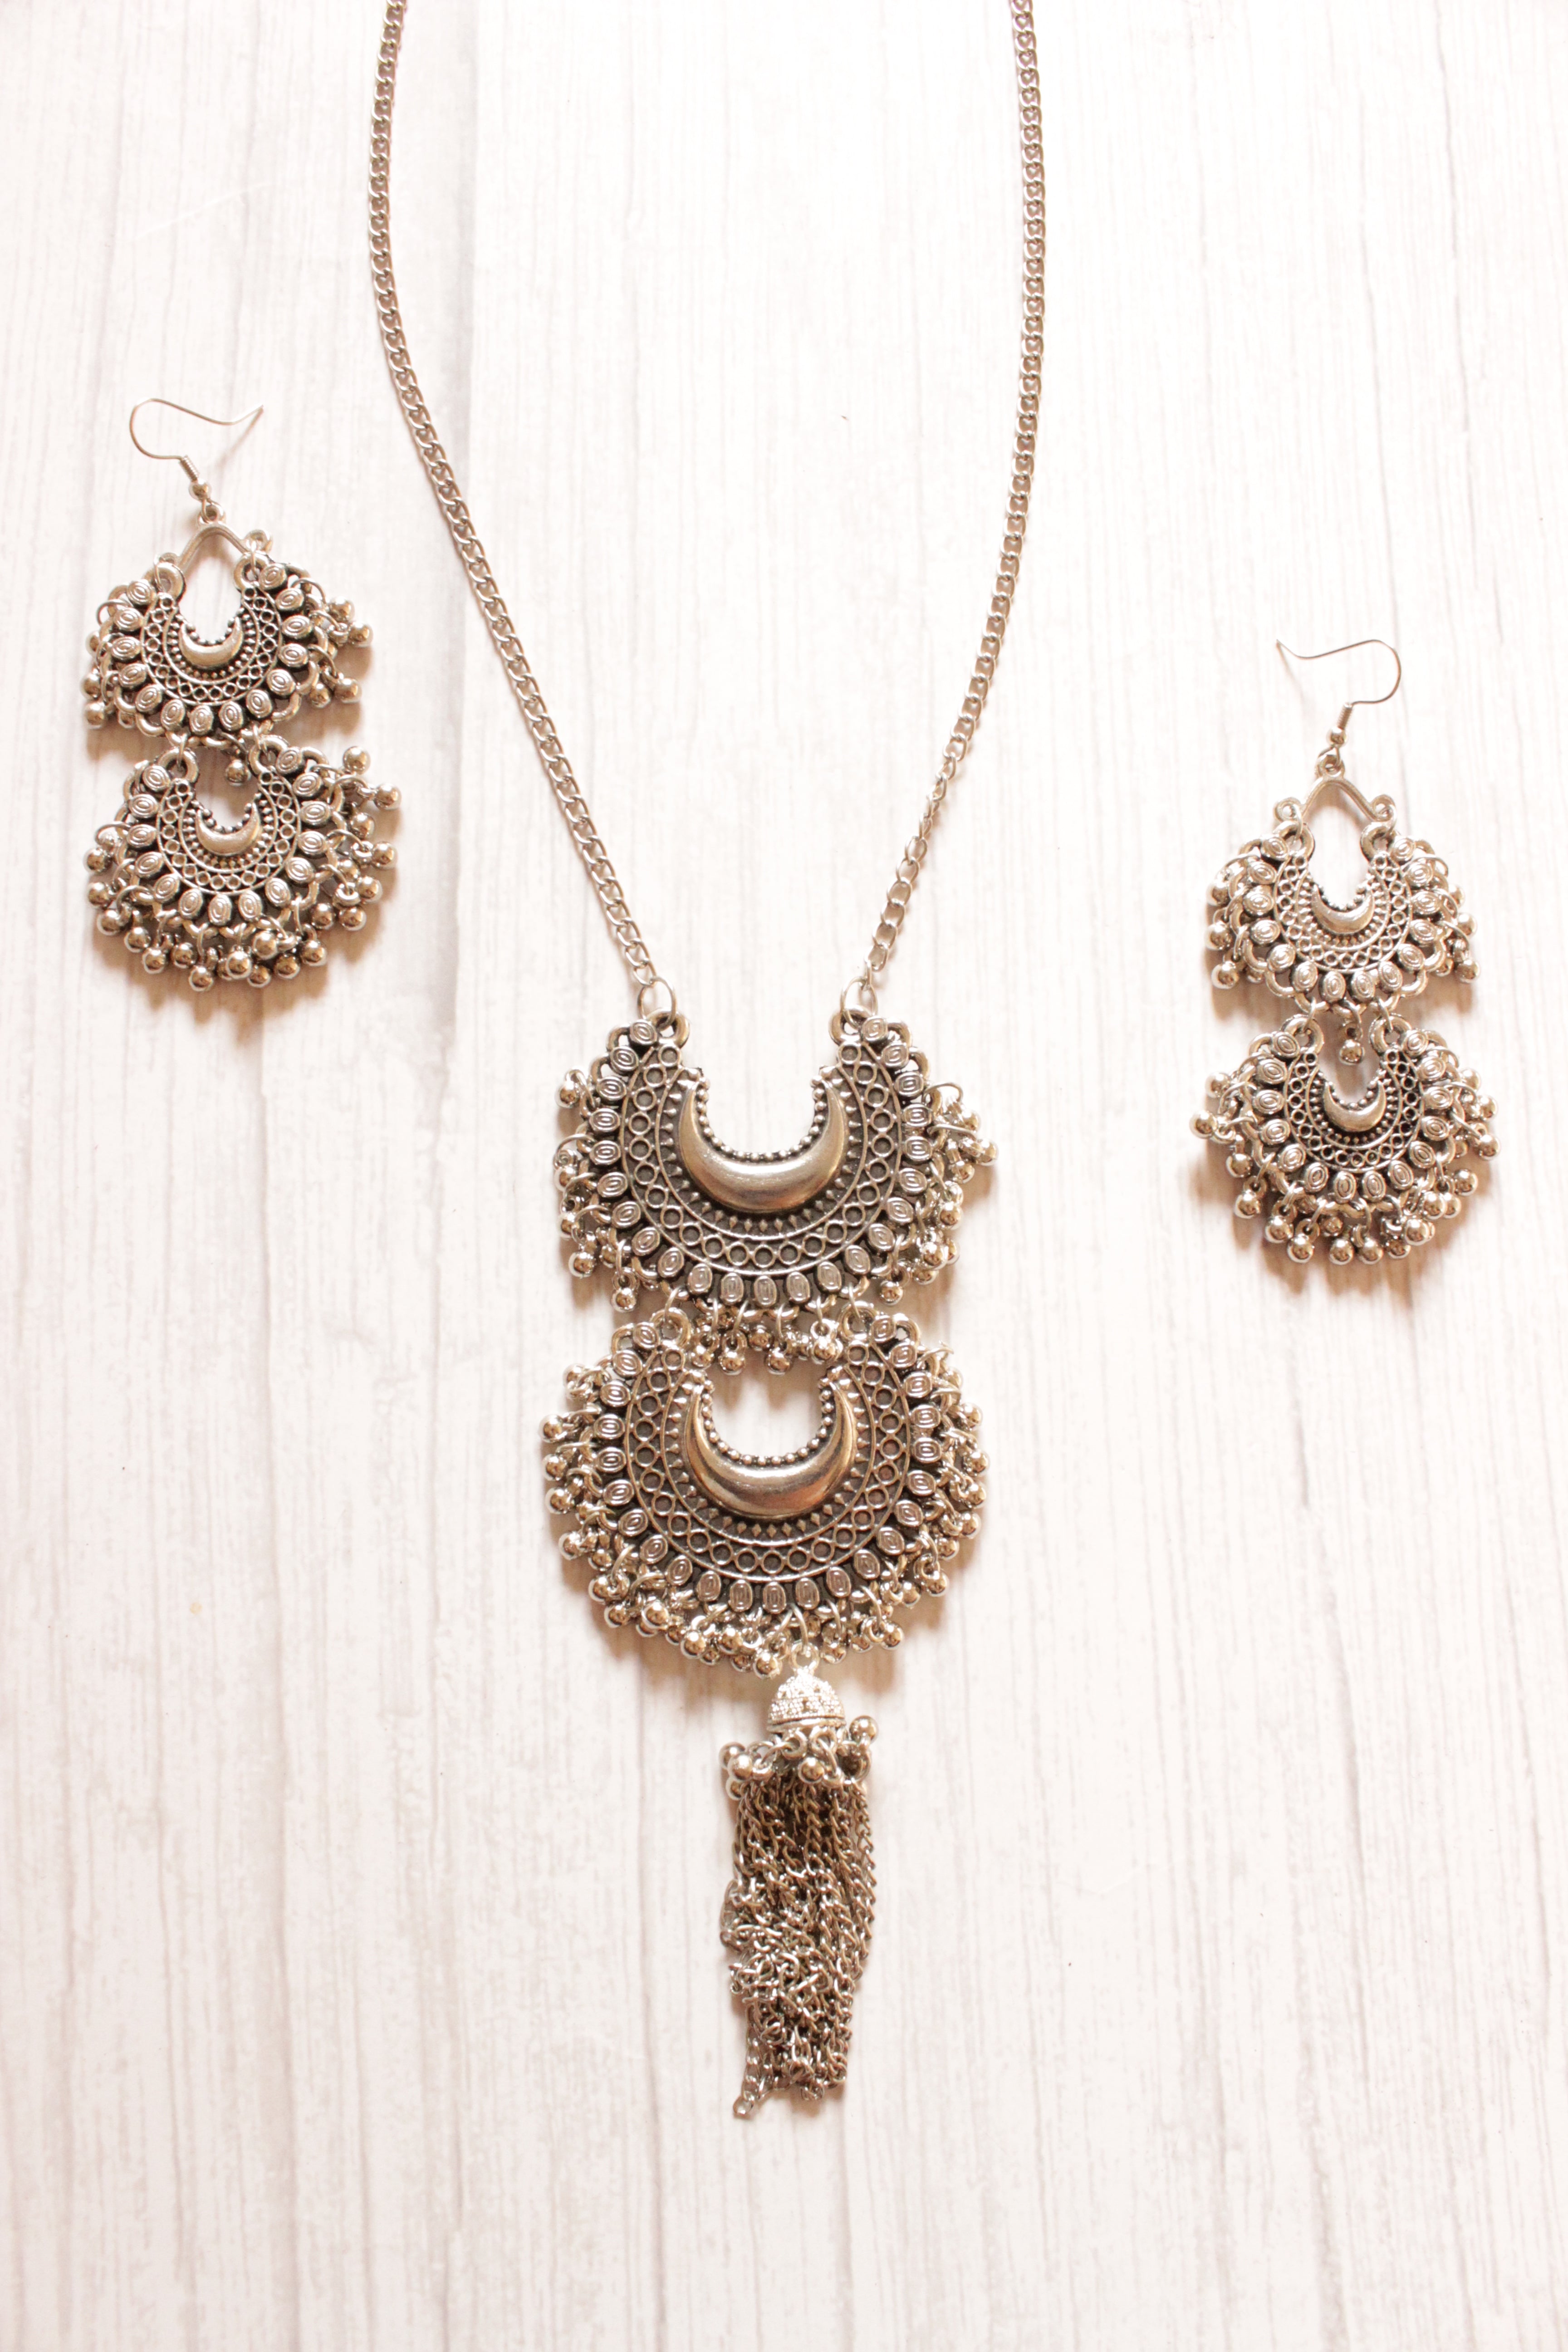 Oxidised Silver 2 layer Pendant Finish Ghungroo Beads Embellished Long Chain Necklace